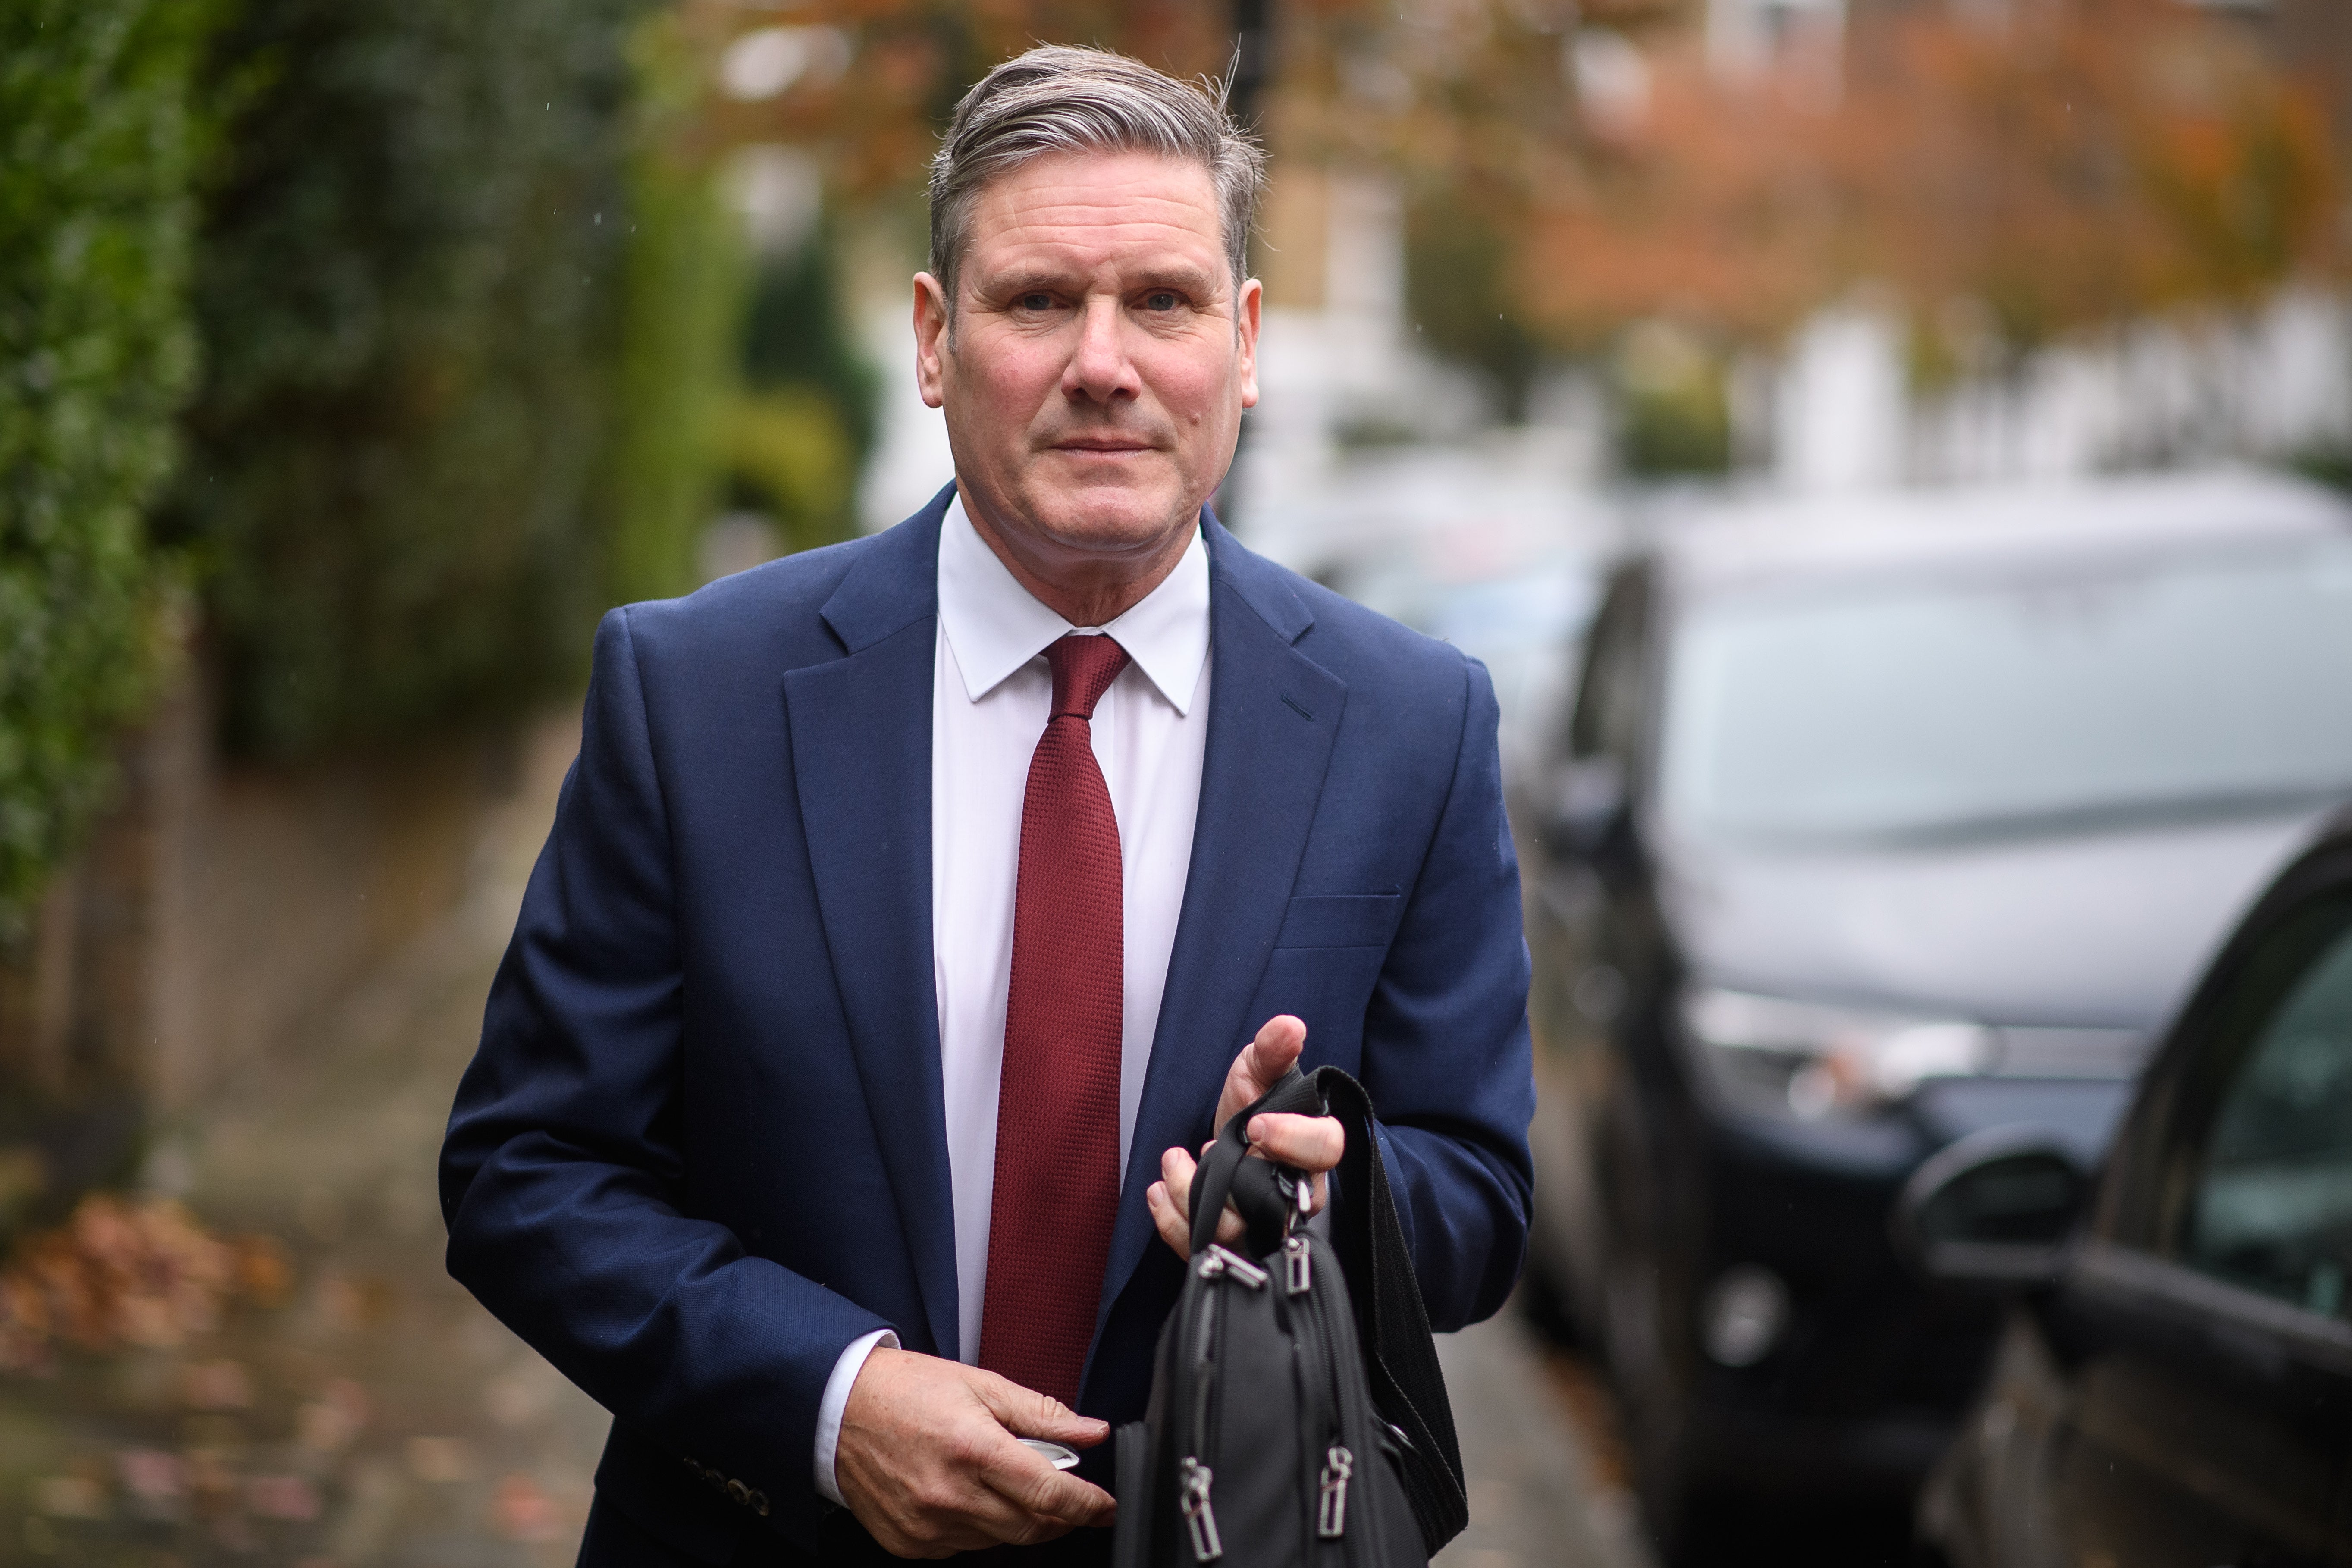 Starmer leaves home to respond to the EHRC report